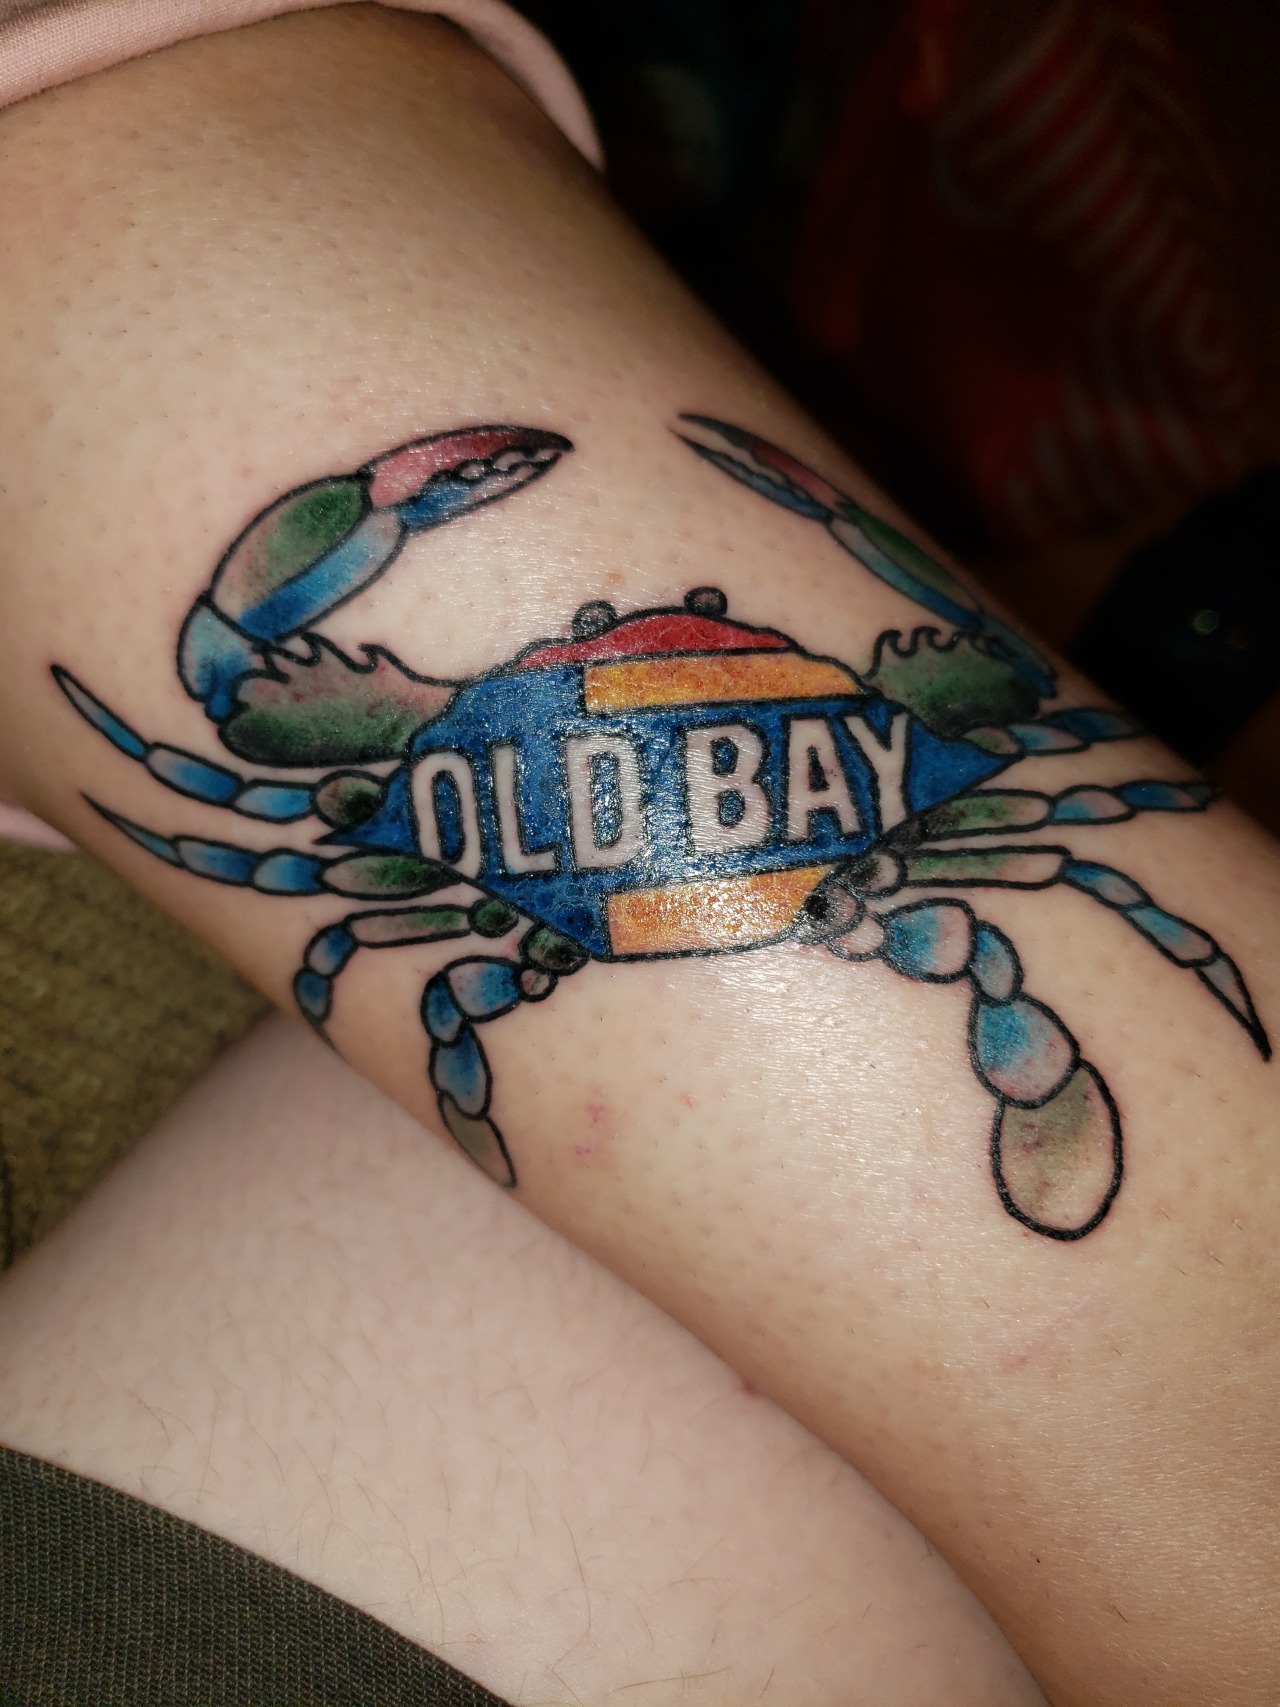 Maryland Pride Forever  Cool Boh flag tattoo  Thanks for sharing with  us Pat DBH  Facebook